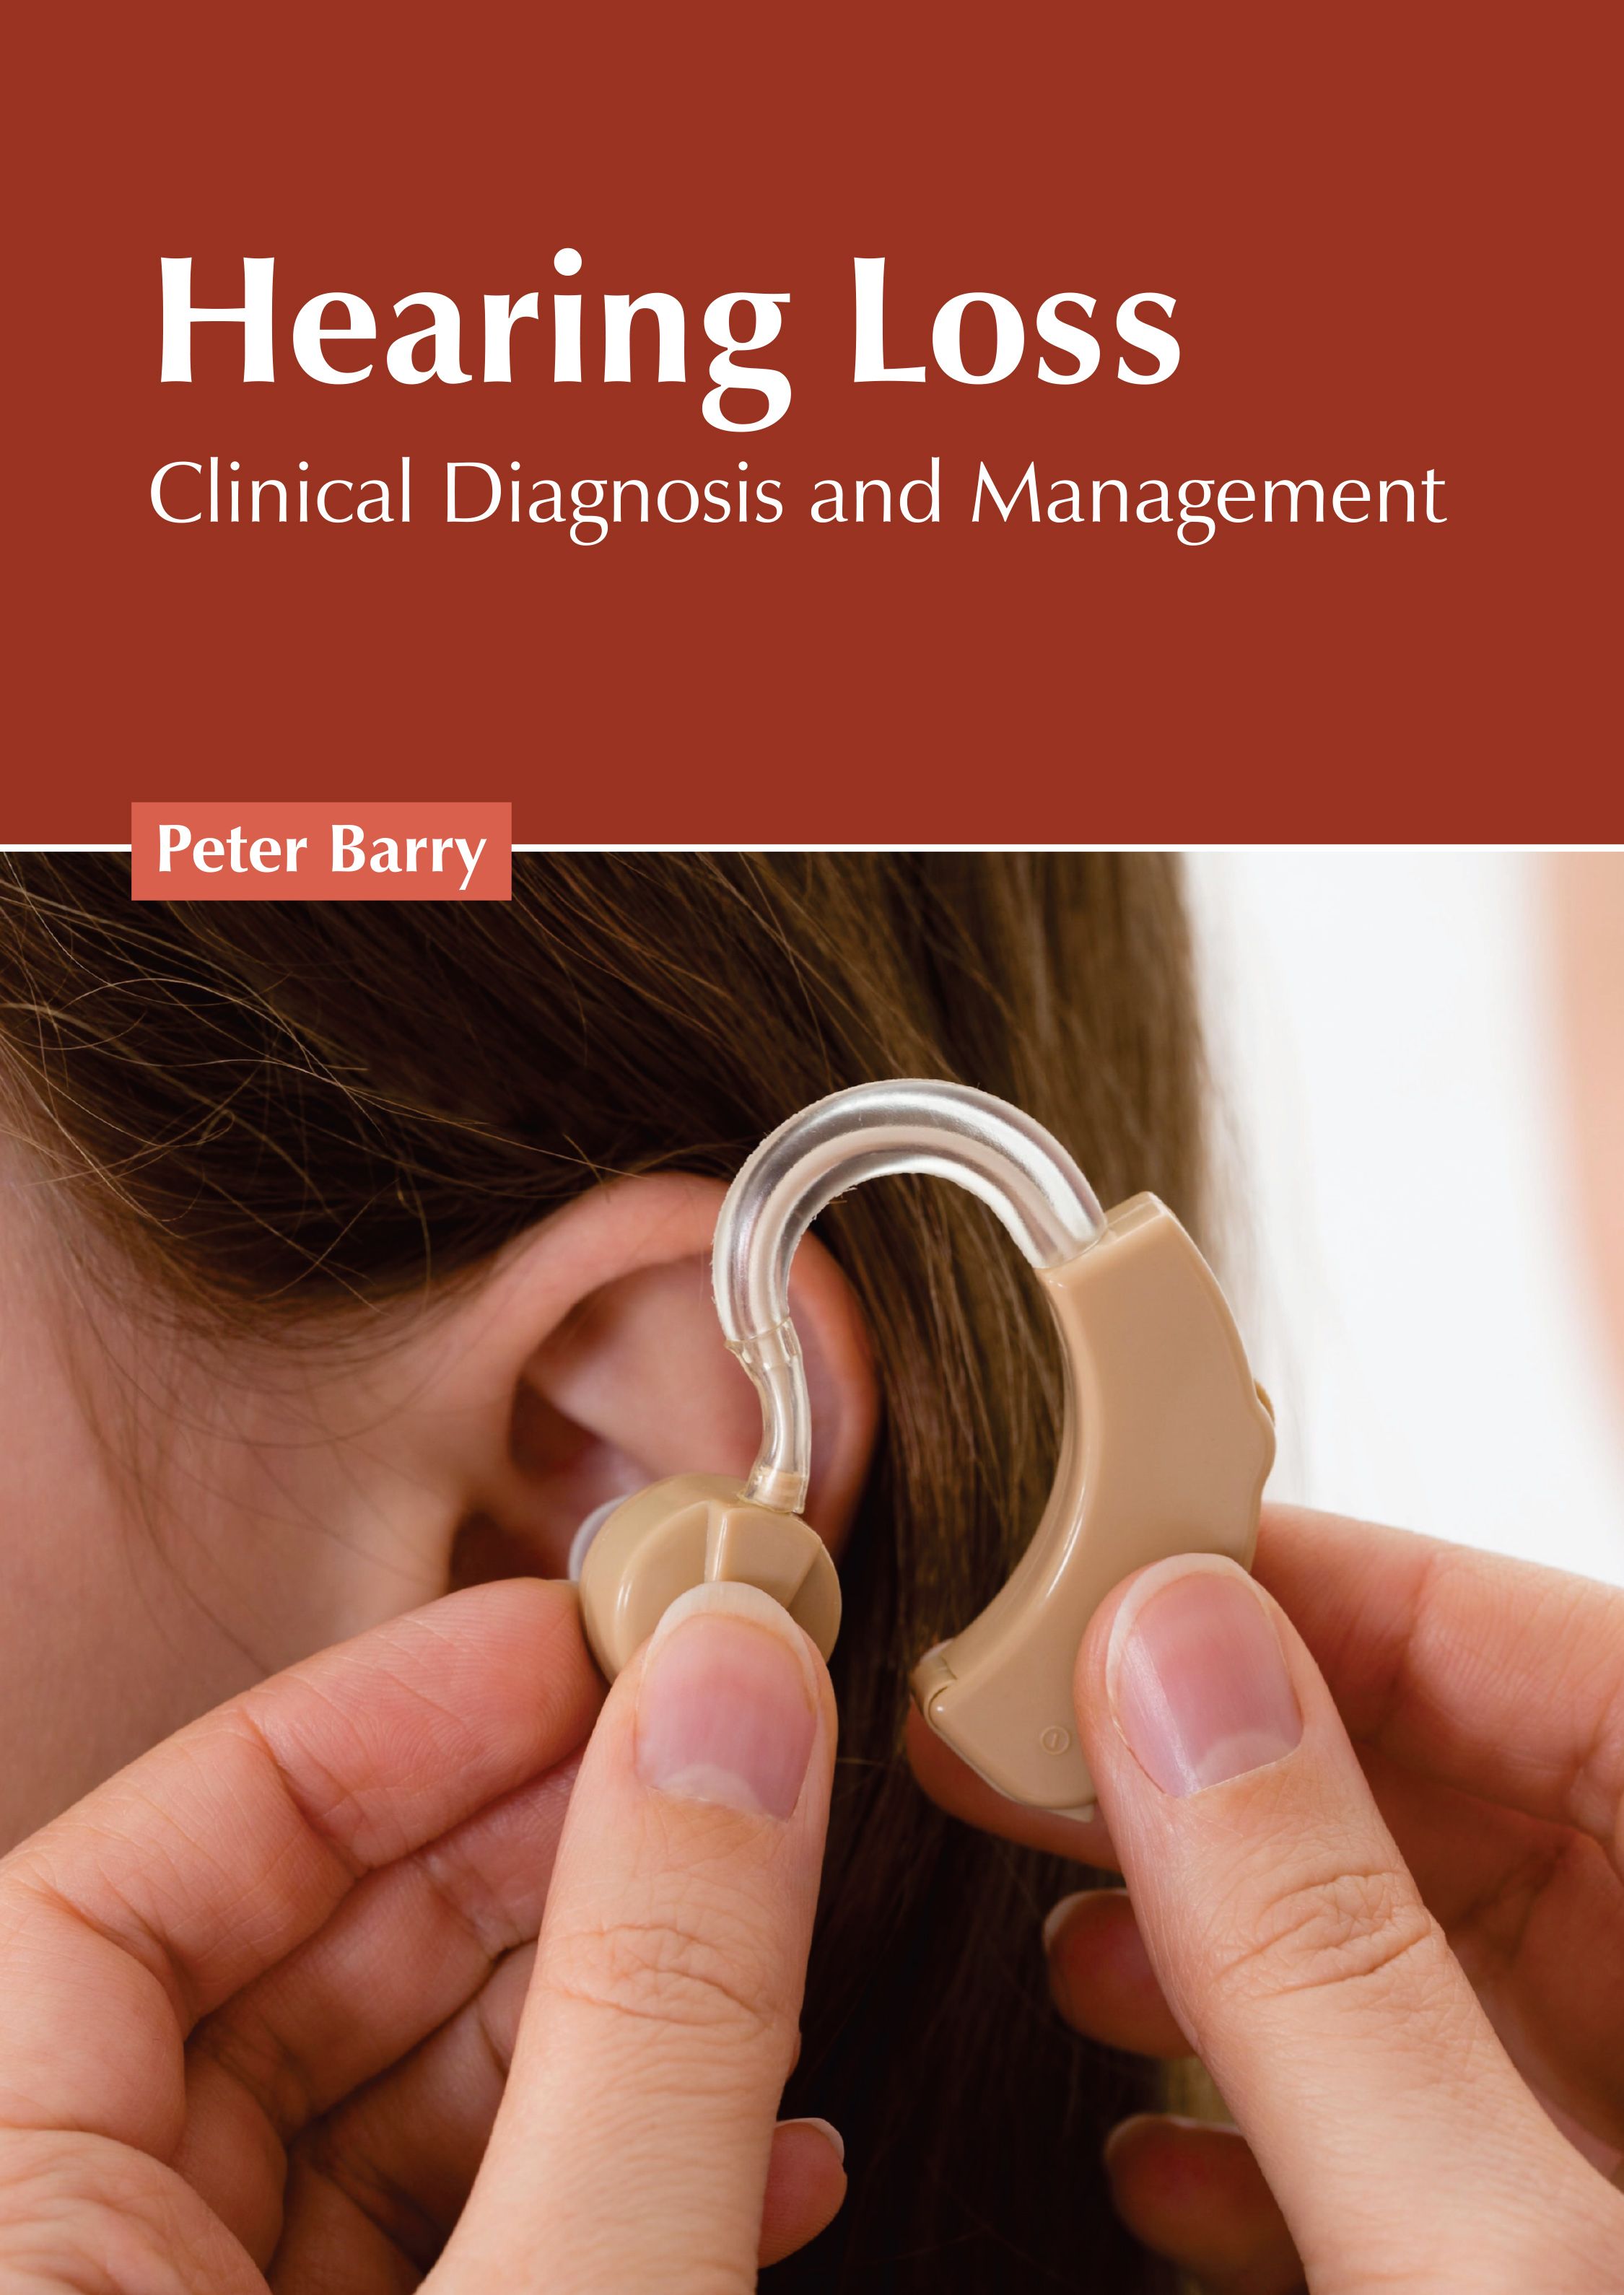 HEARING LOSS: CLINICAL DIAGNOSIS AND MANAGEMENT